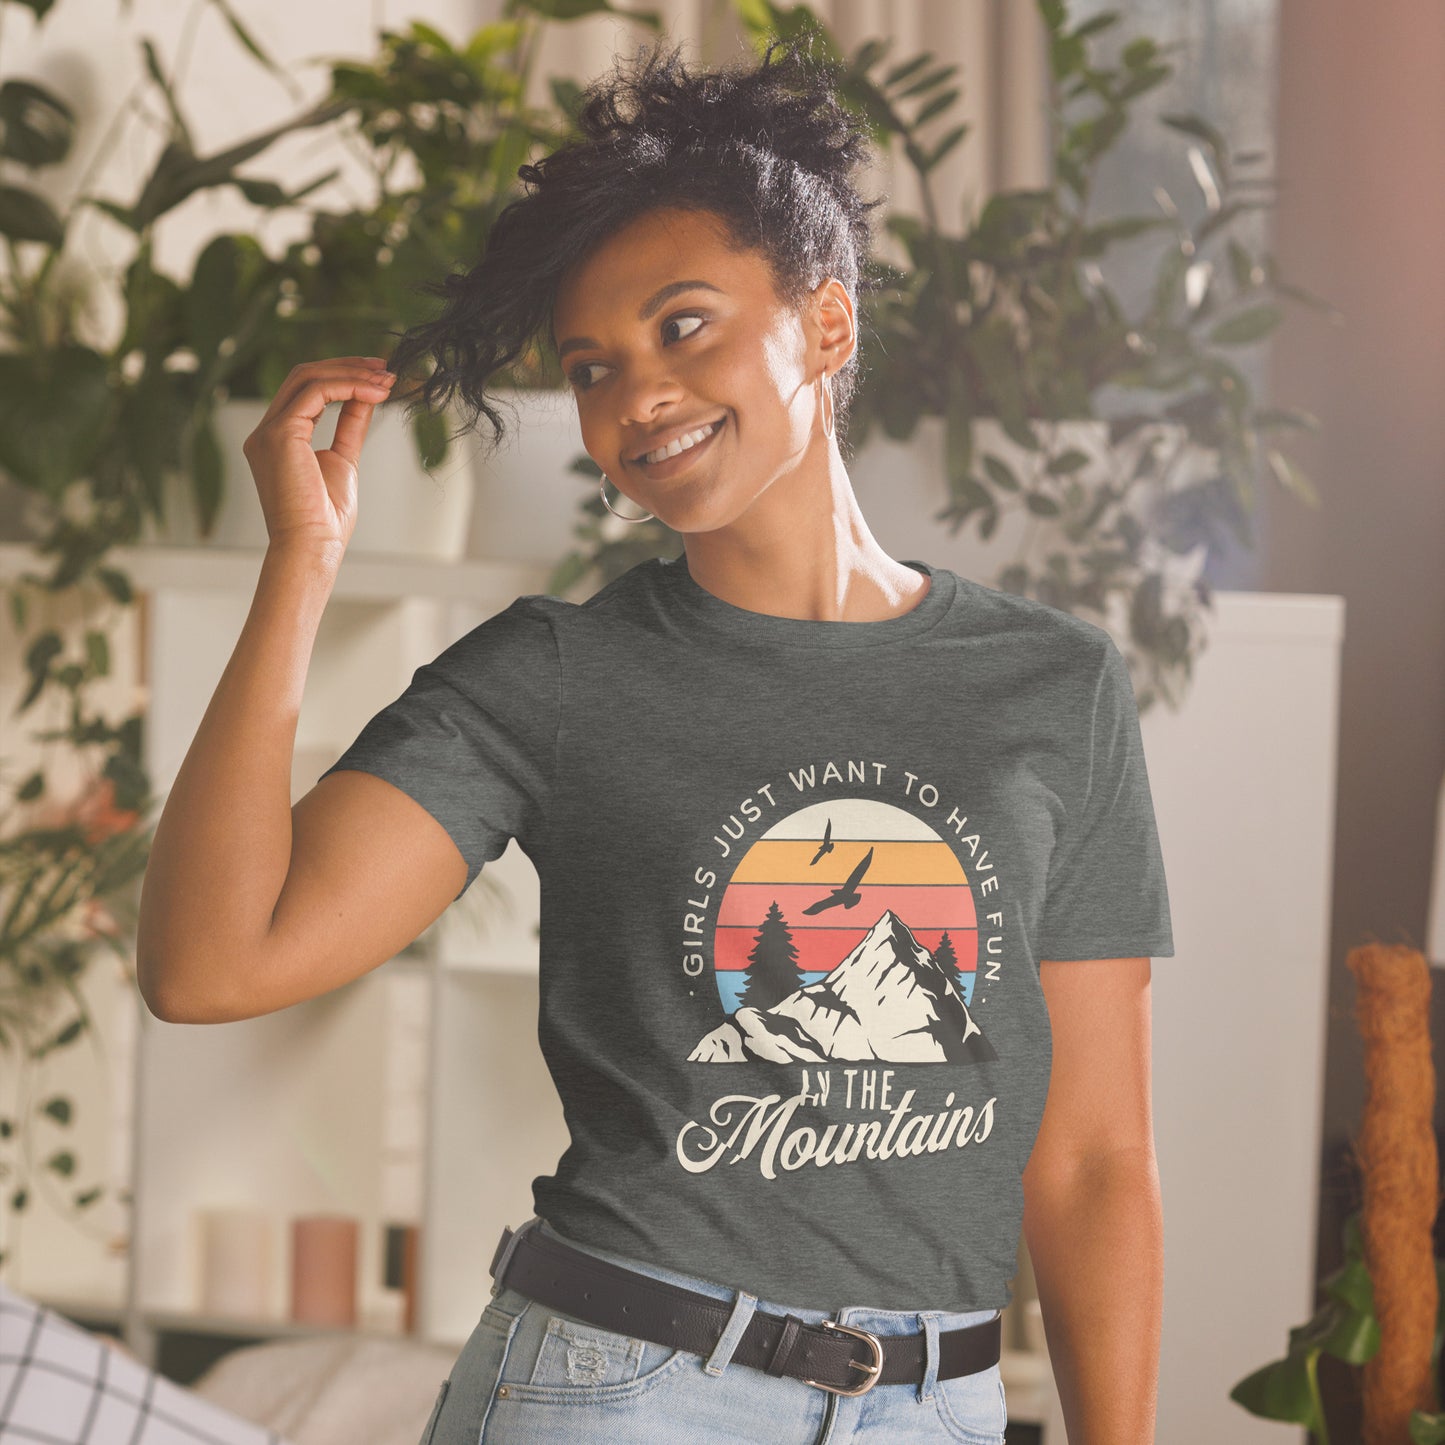 Short-Sleeve Unisex T-Shirt Girls Just Want to Have Fun in the Mountains